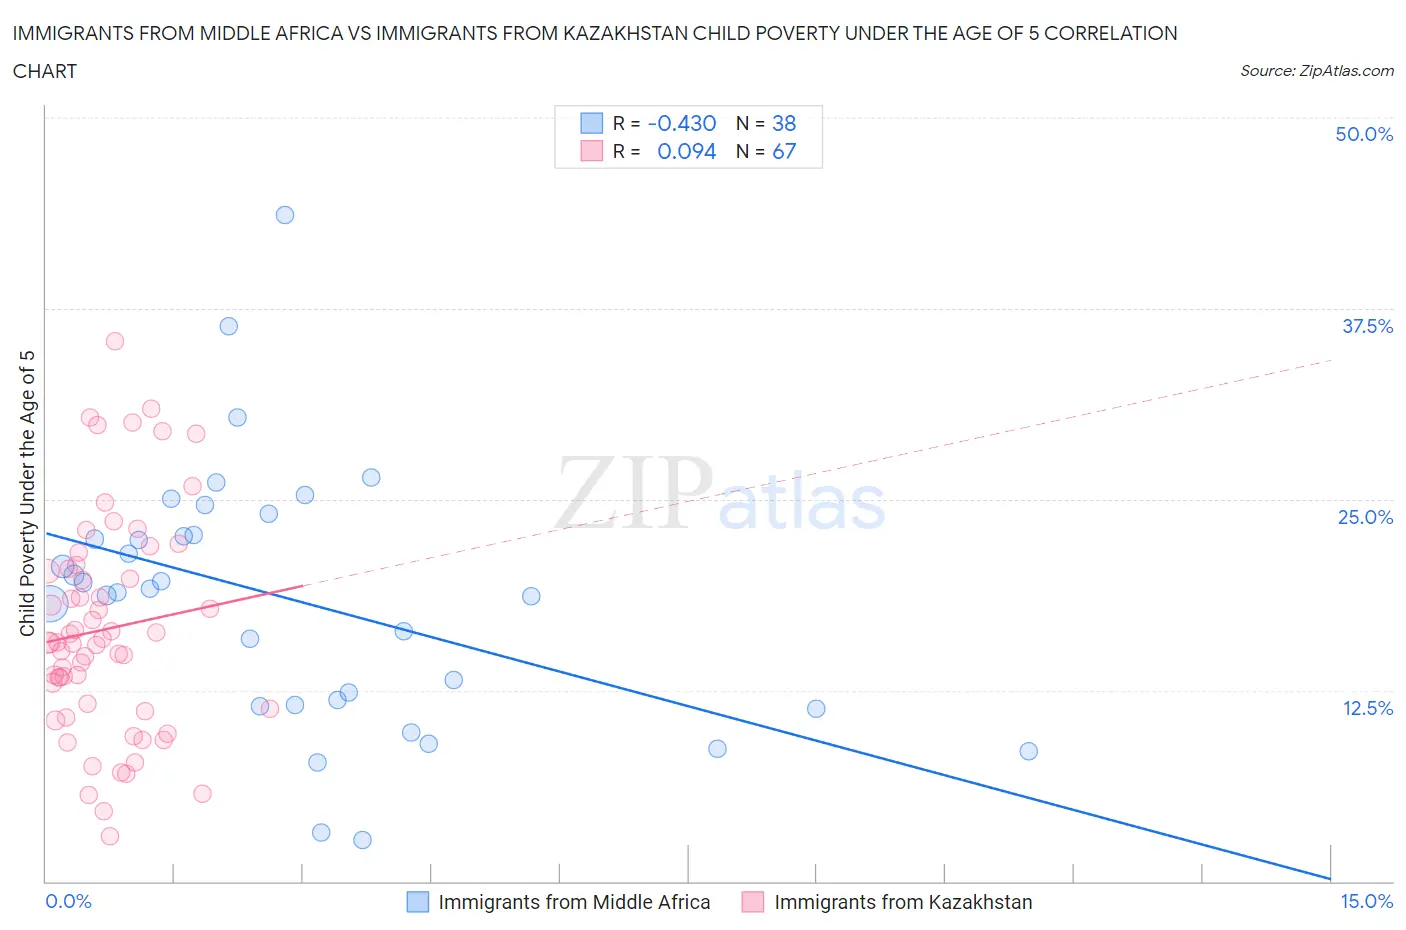 Immigrants from Middle Africa vs Immigrants from Kazakhstan Child Poverty Under the Age of 5